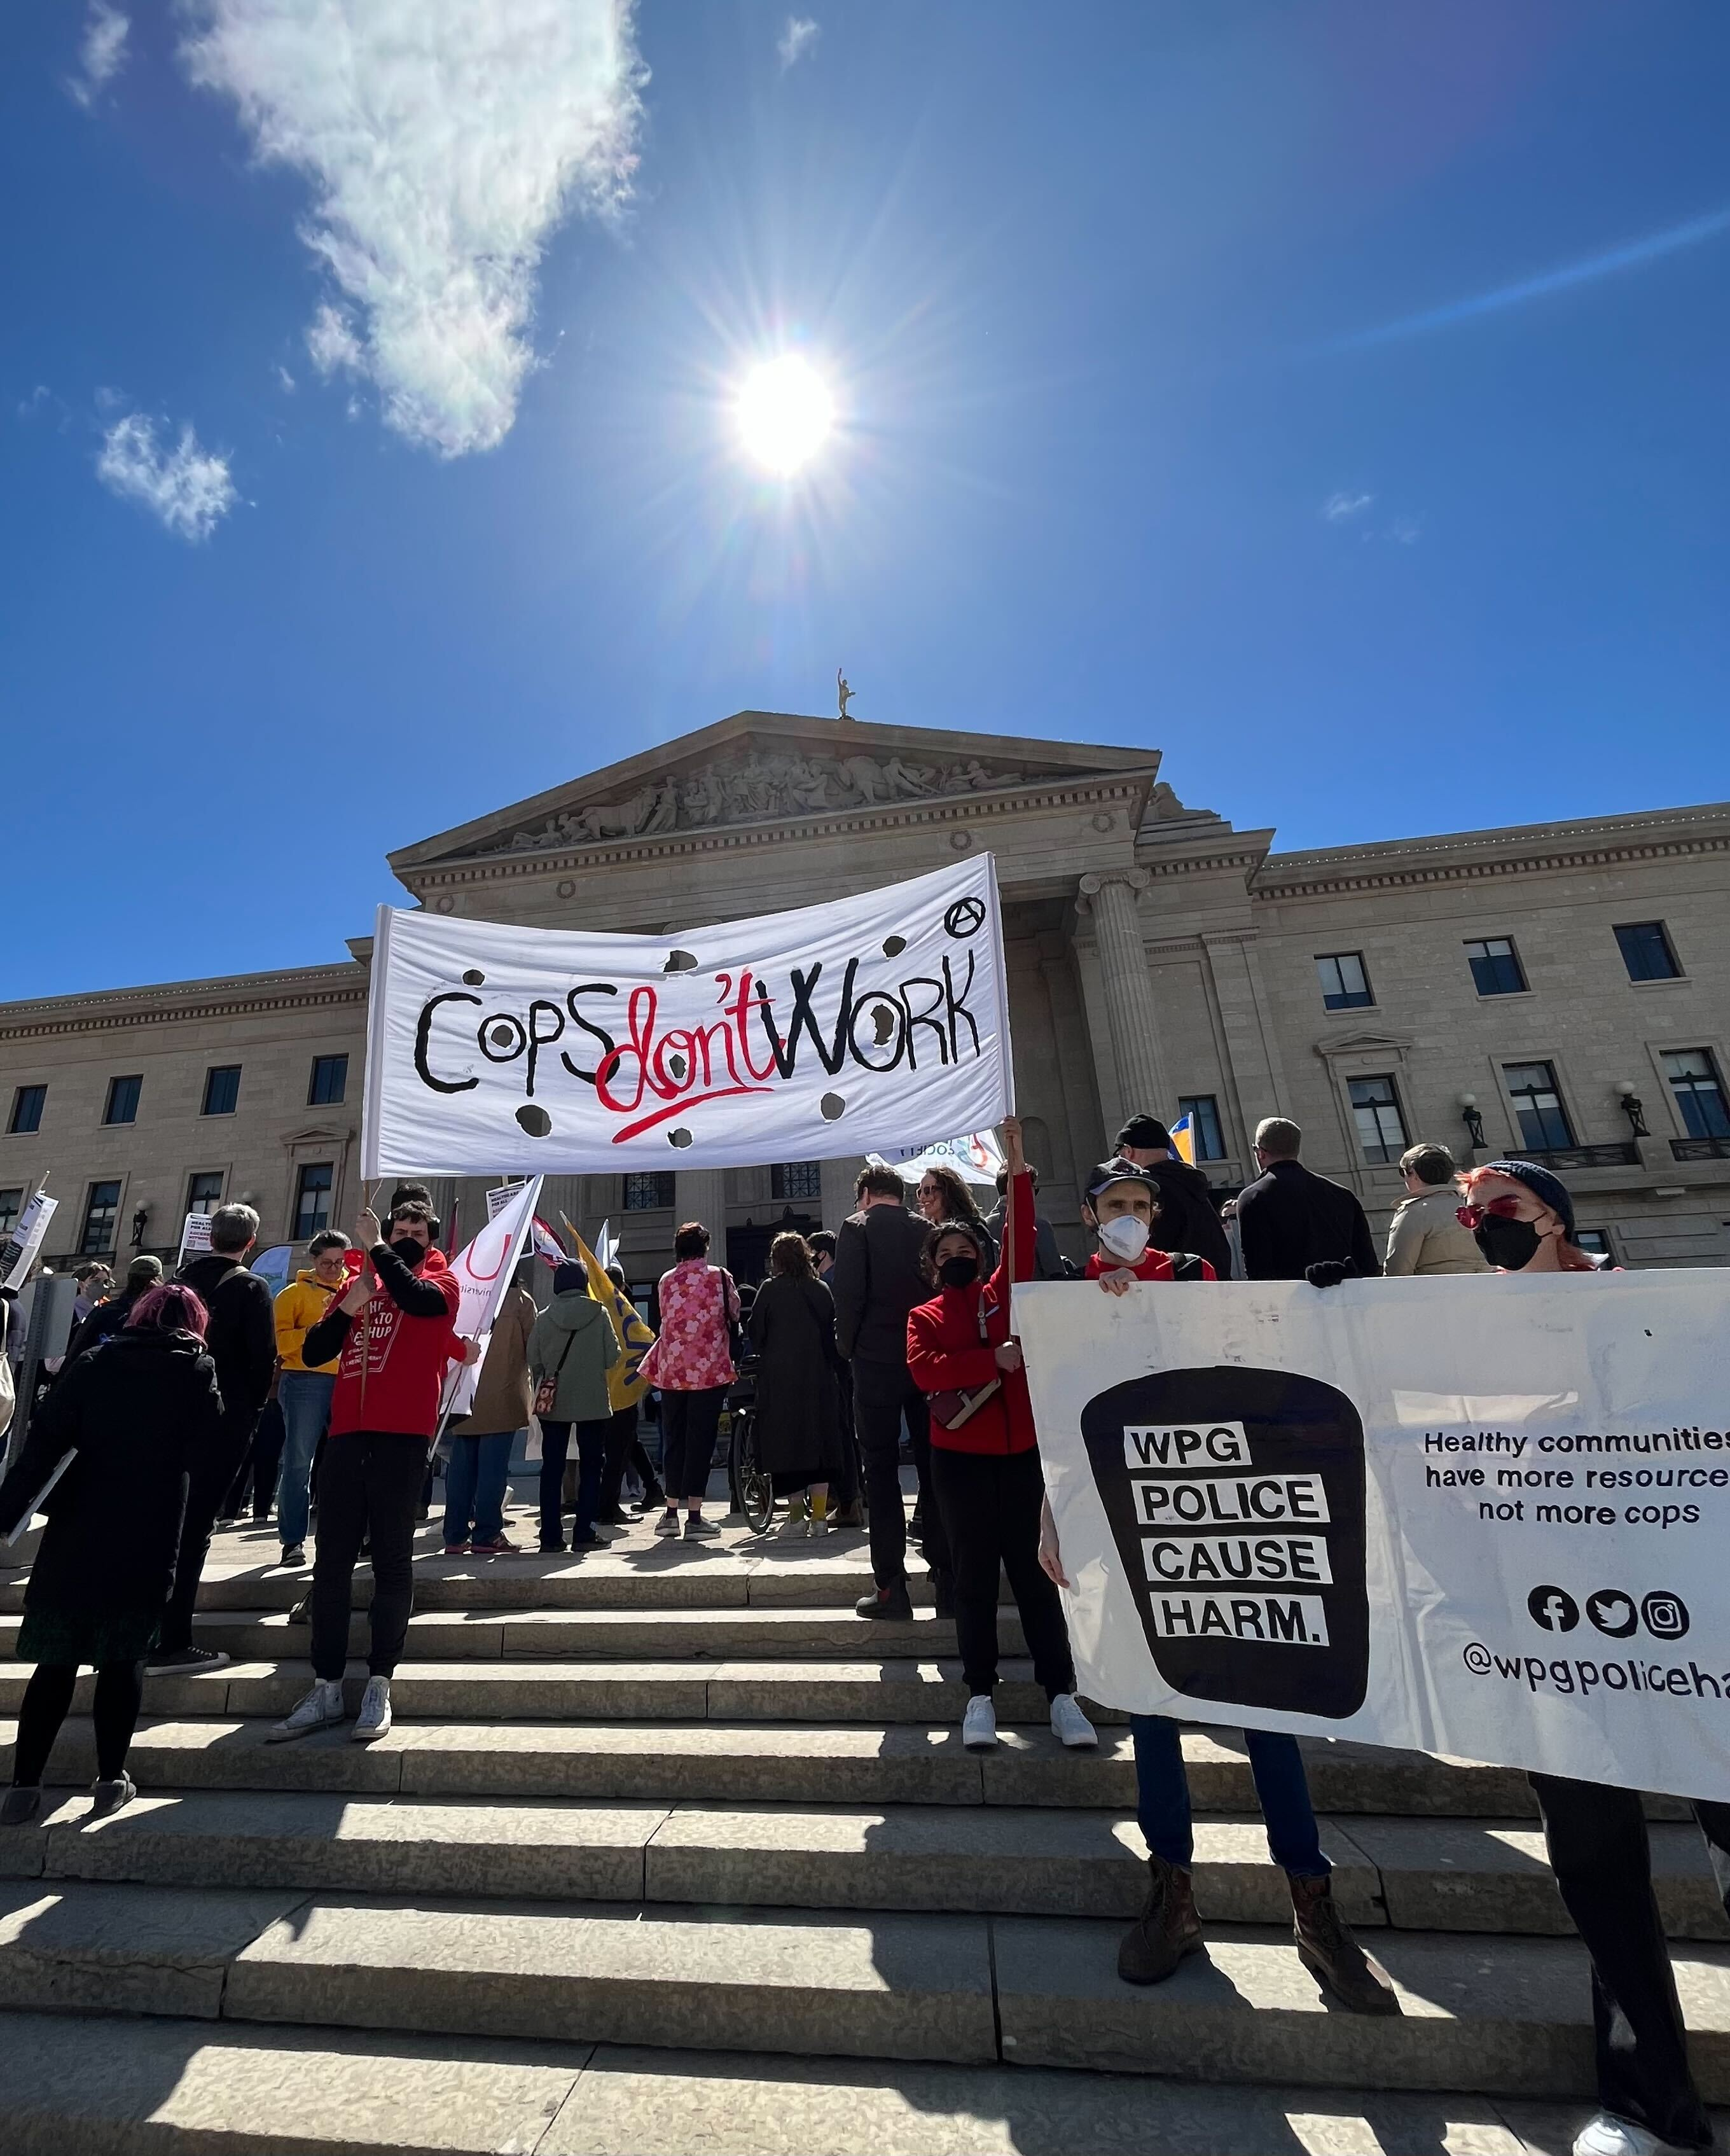 A photo taken on the lower steps of the Manitoba Legislature beneath a bright blue sky and sun. In the middle is a large banner that reads "Cops Don't Work." On the right is a WPCH banner.